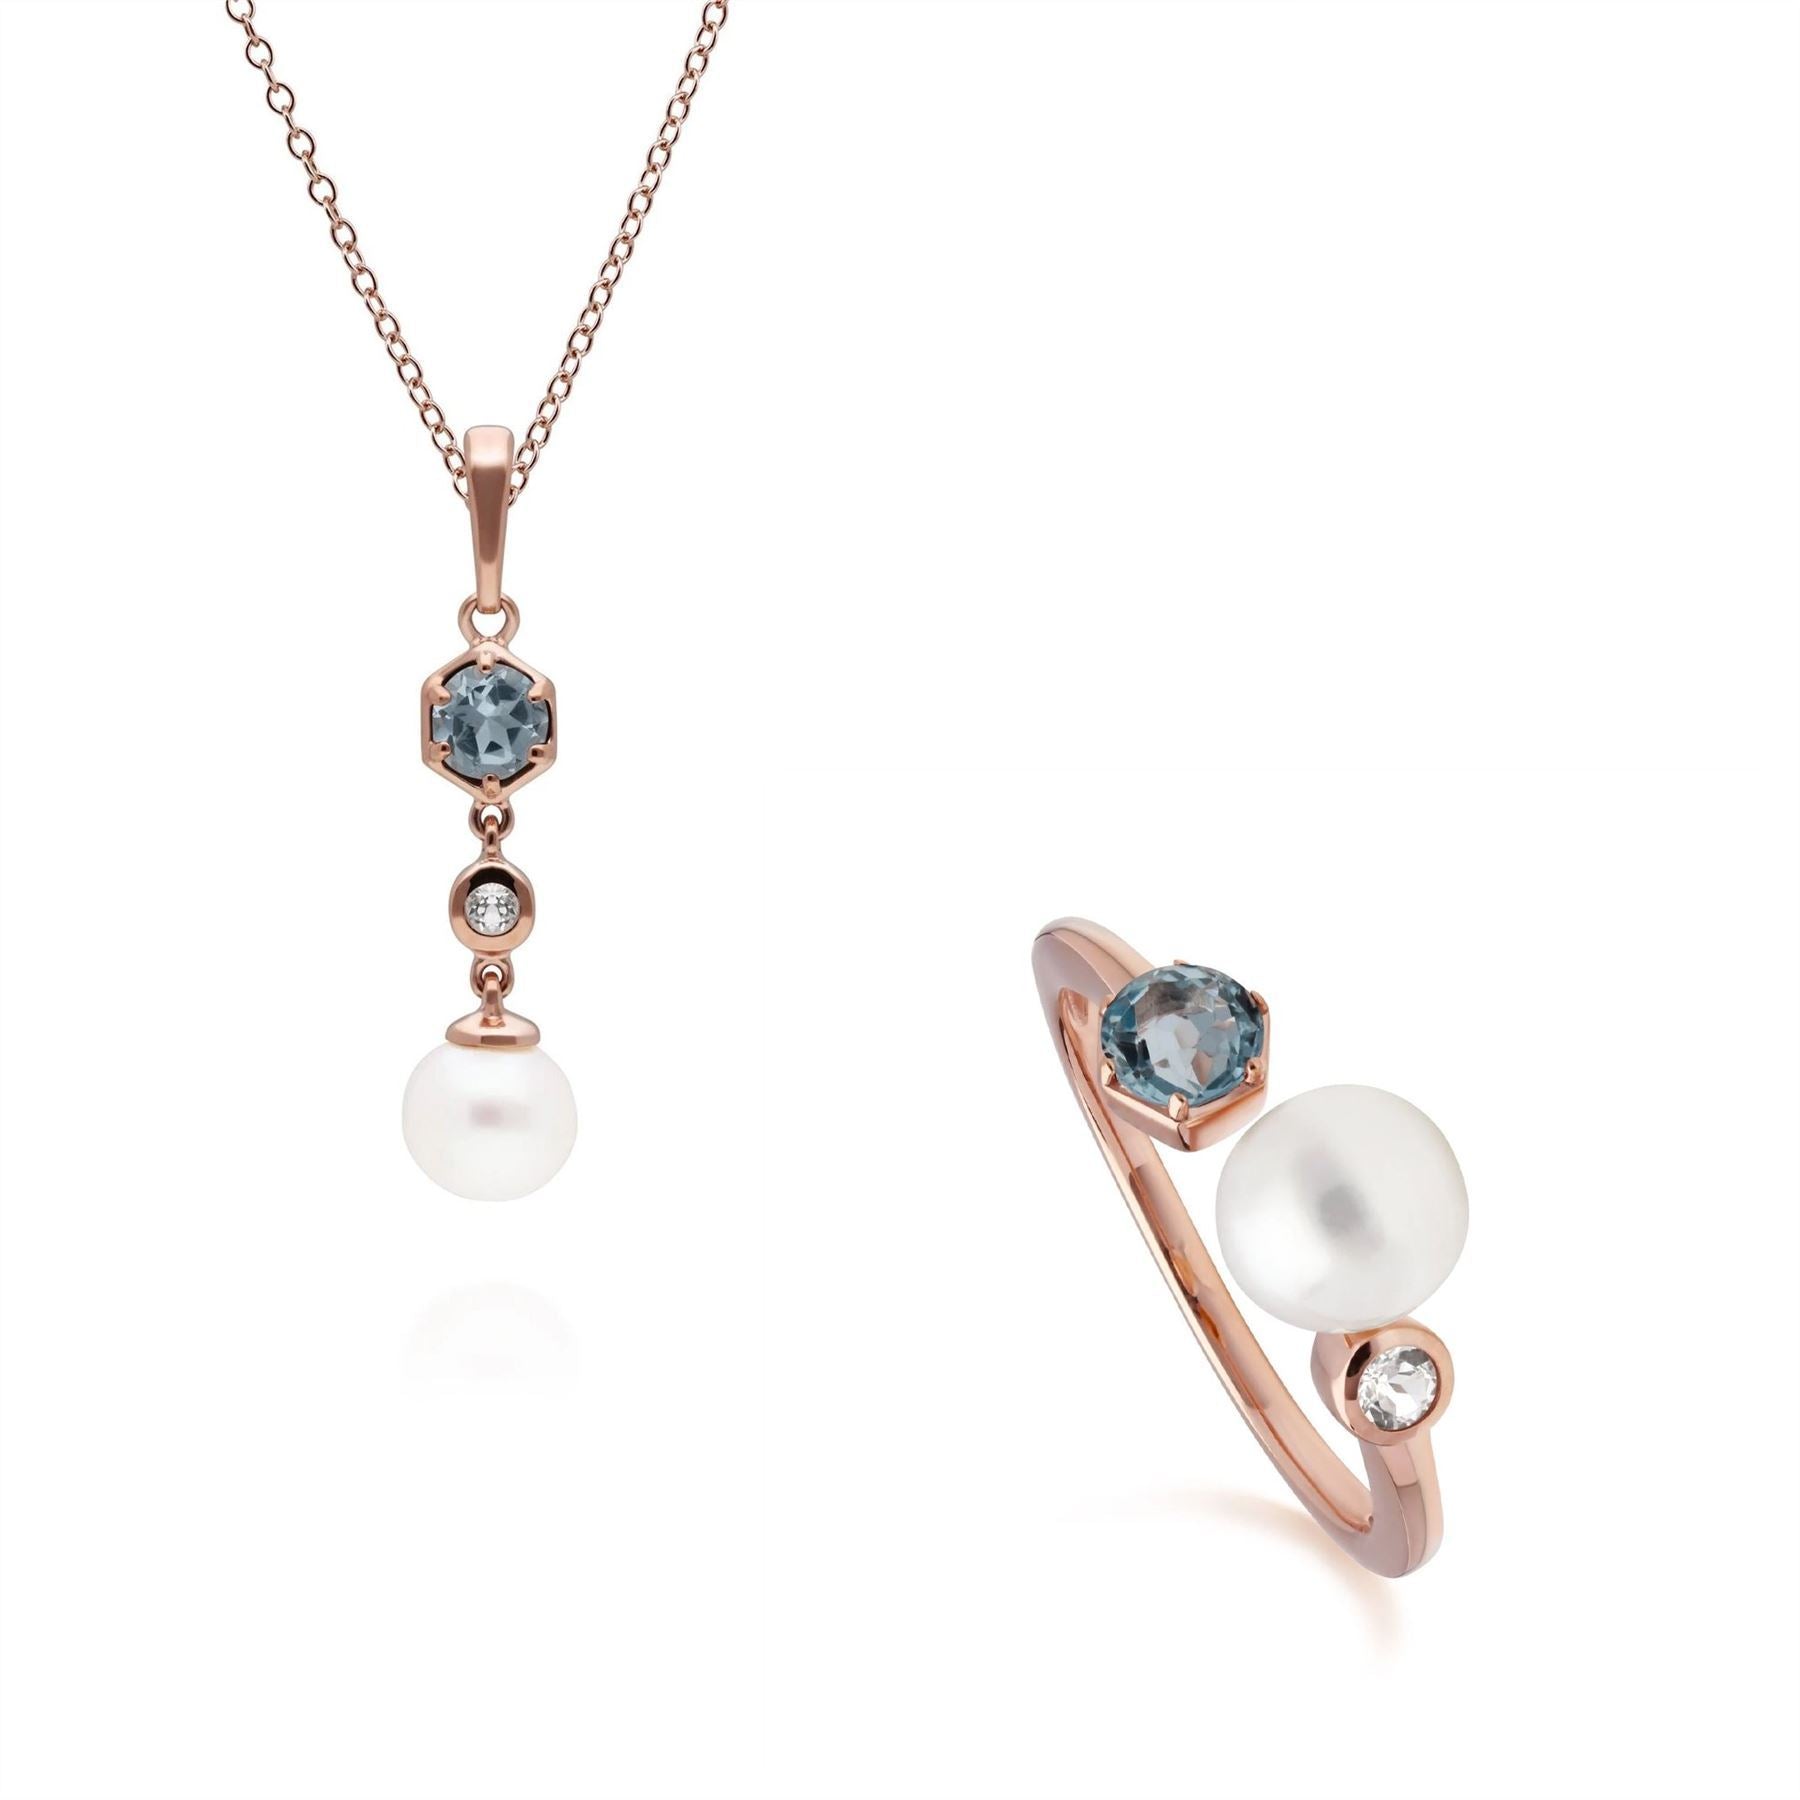 Modern Pearl & Topaz Pendant & Ring Set in Rose Gold Plated Sterling Silver